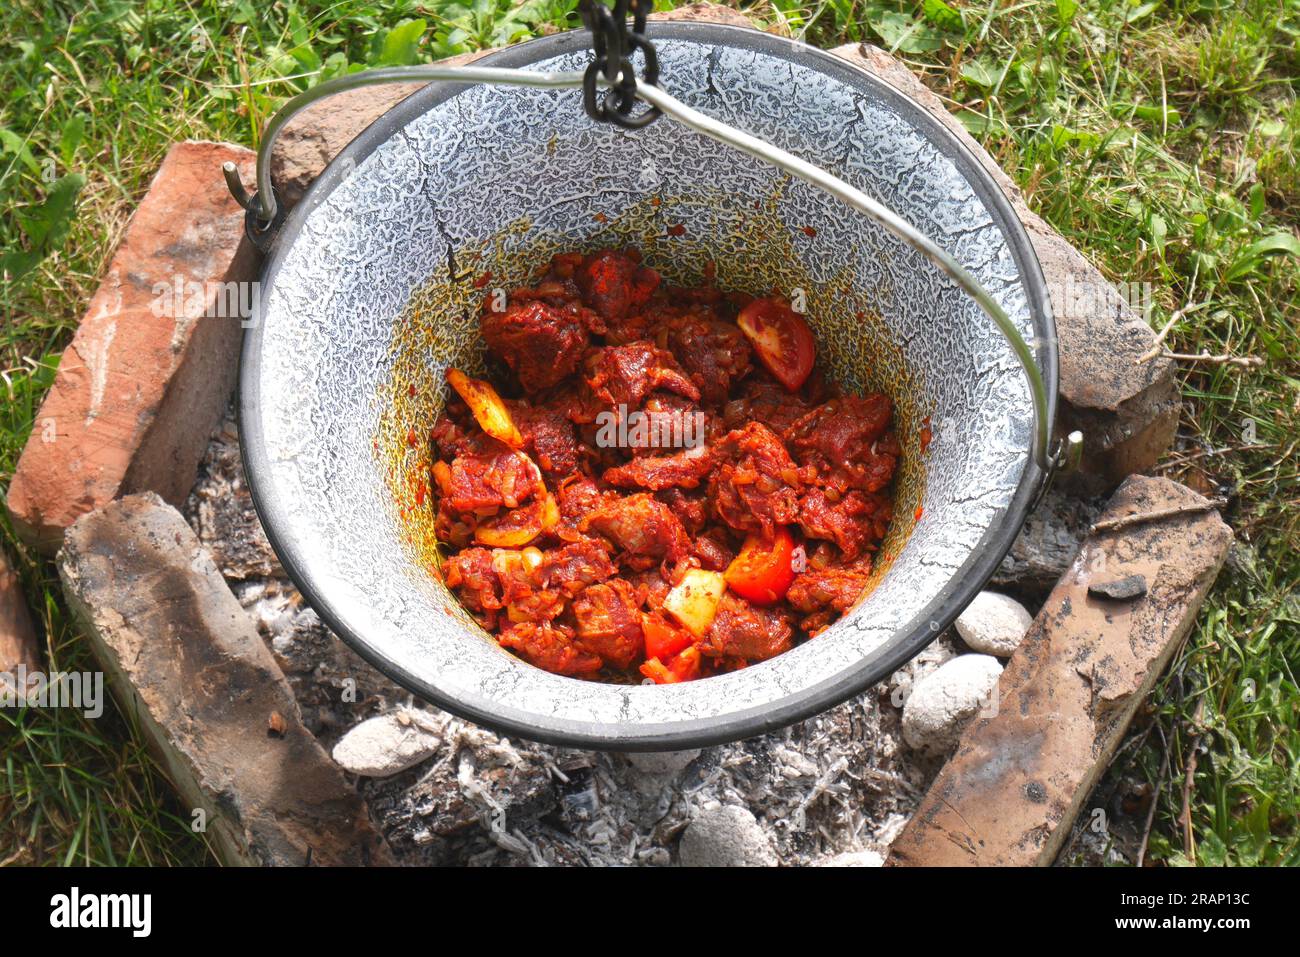 Making Hungarian Gulyas in a cauldron, Bogracs, , in the garden, Szigethalom, Hungary Stock Photo